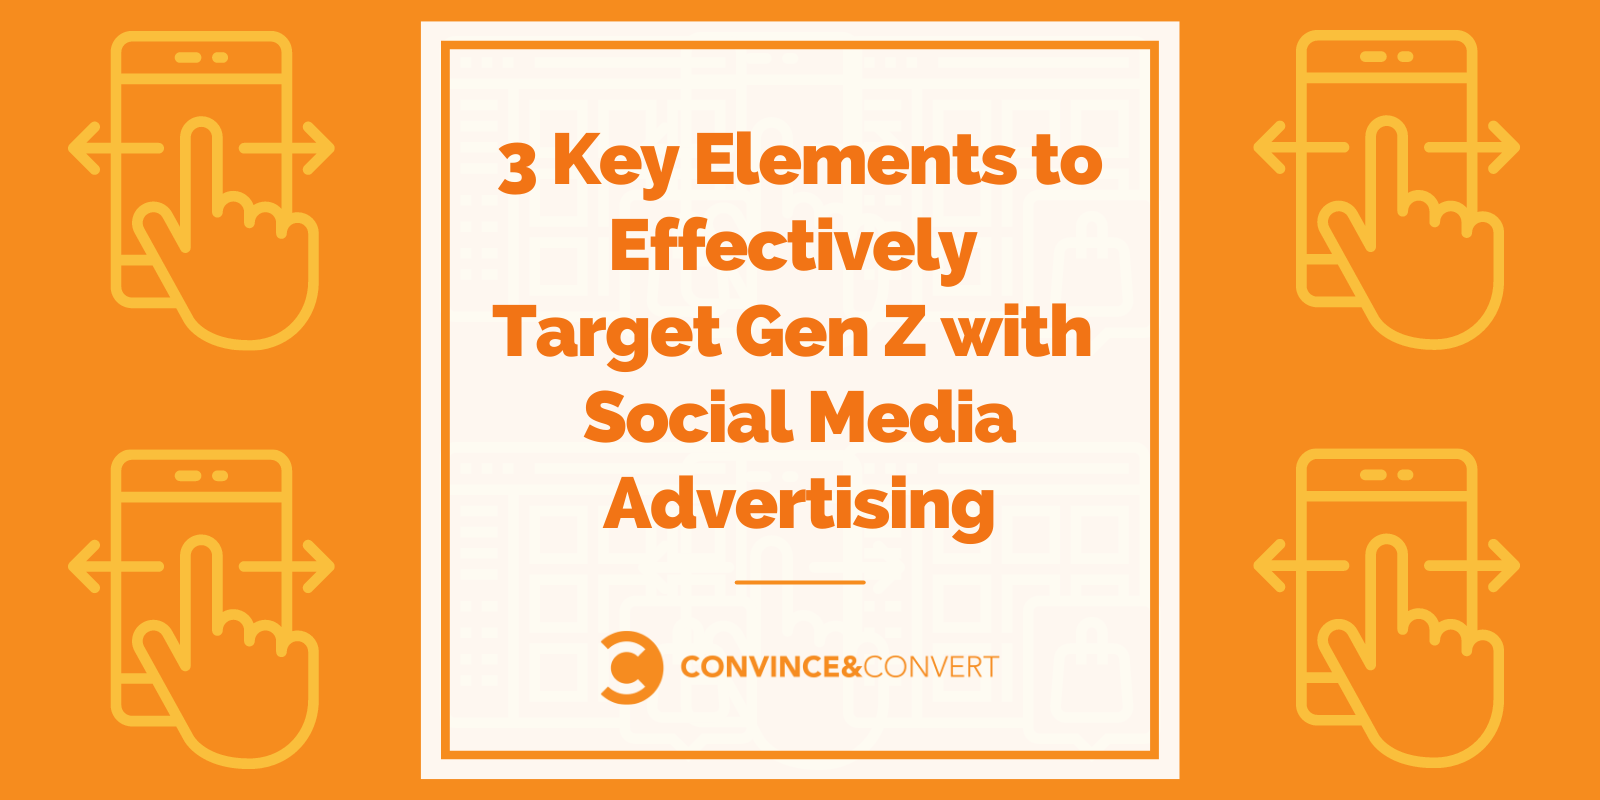 3-Key-Elements-to-Effectively-Target-Gen-Z-with-Social-Media-Advertising